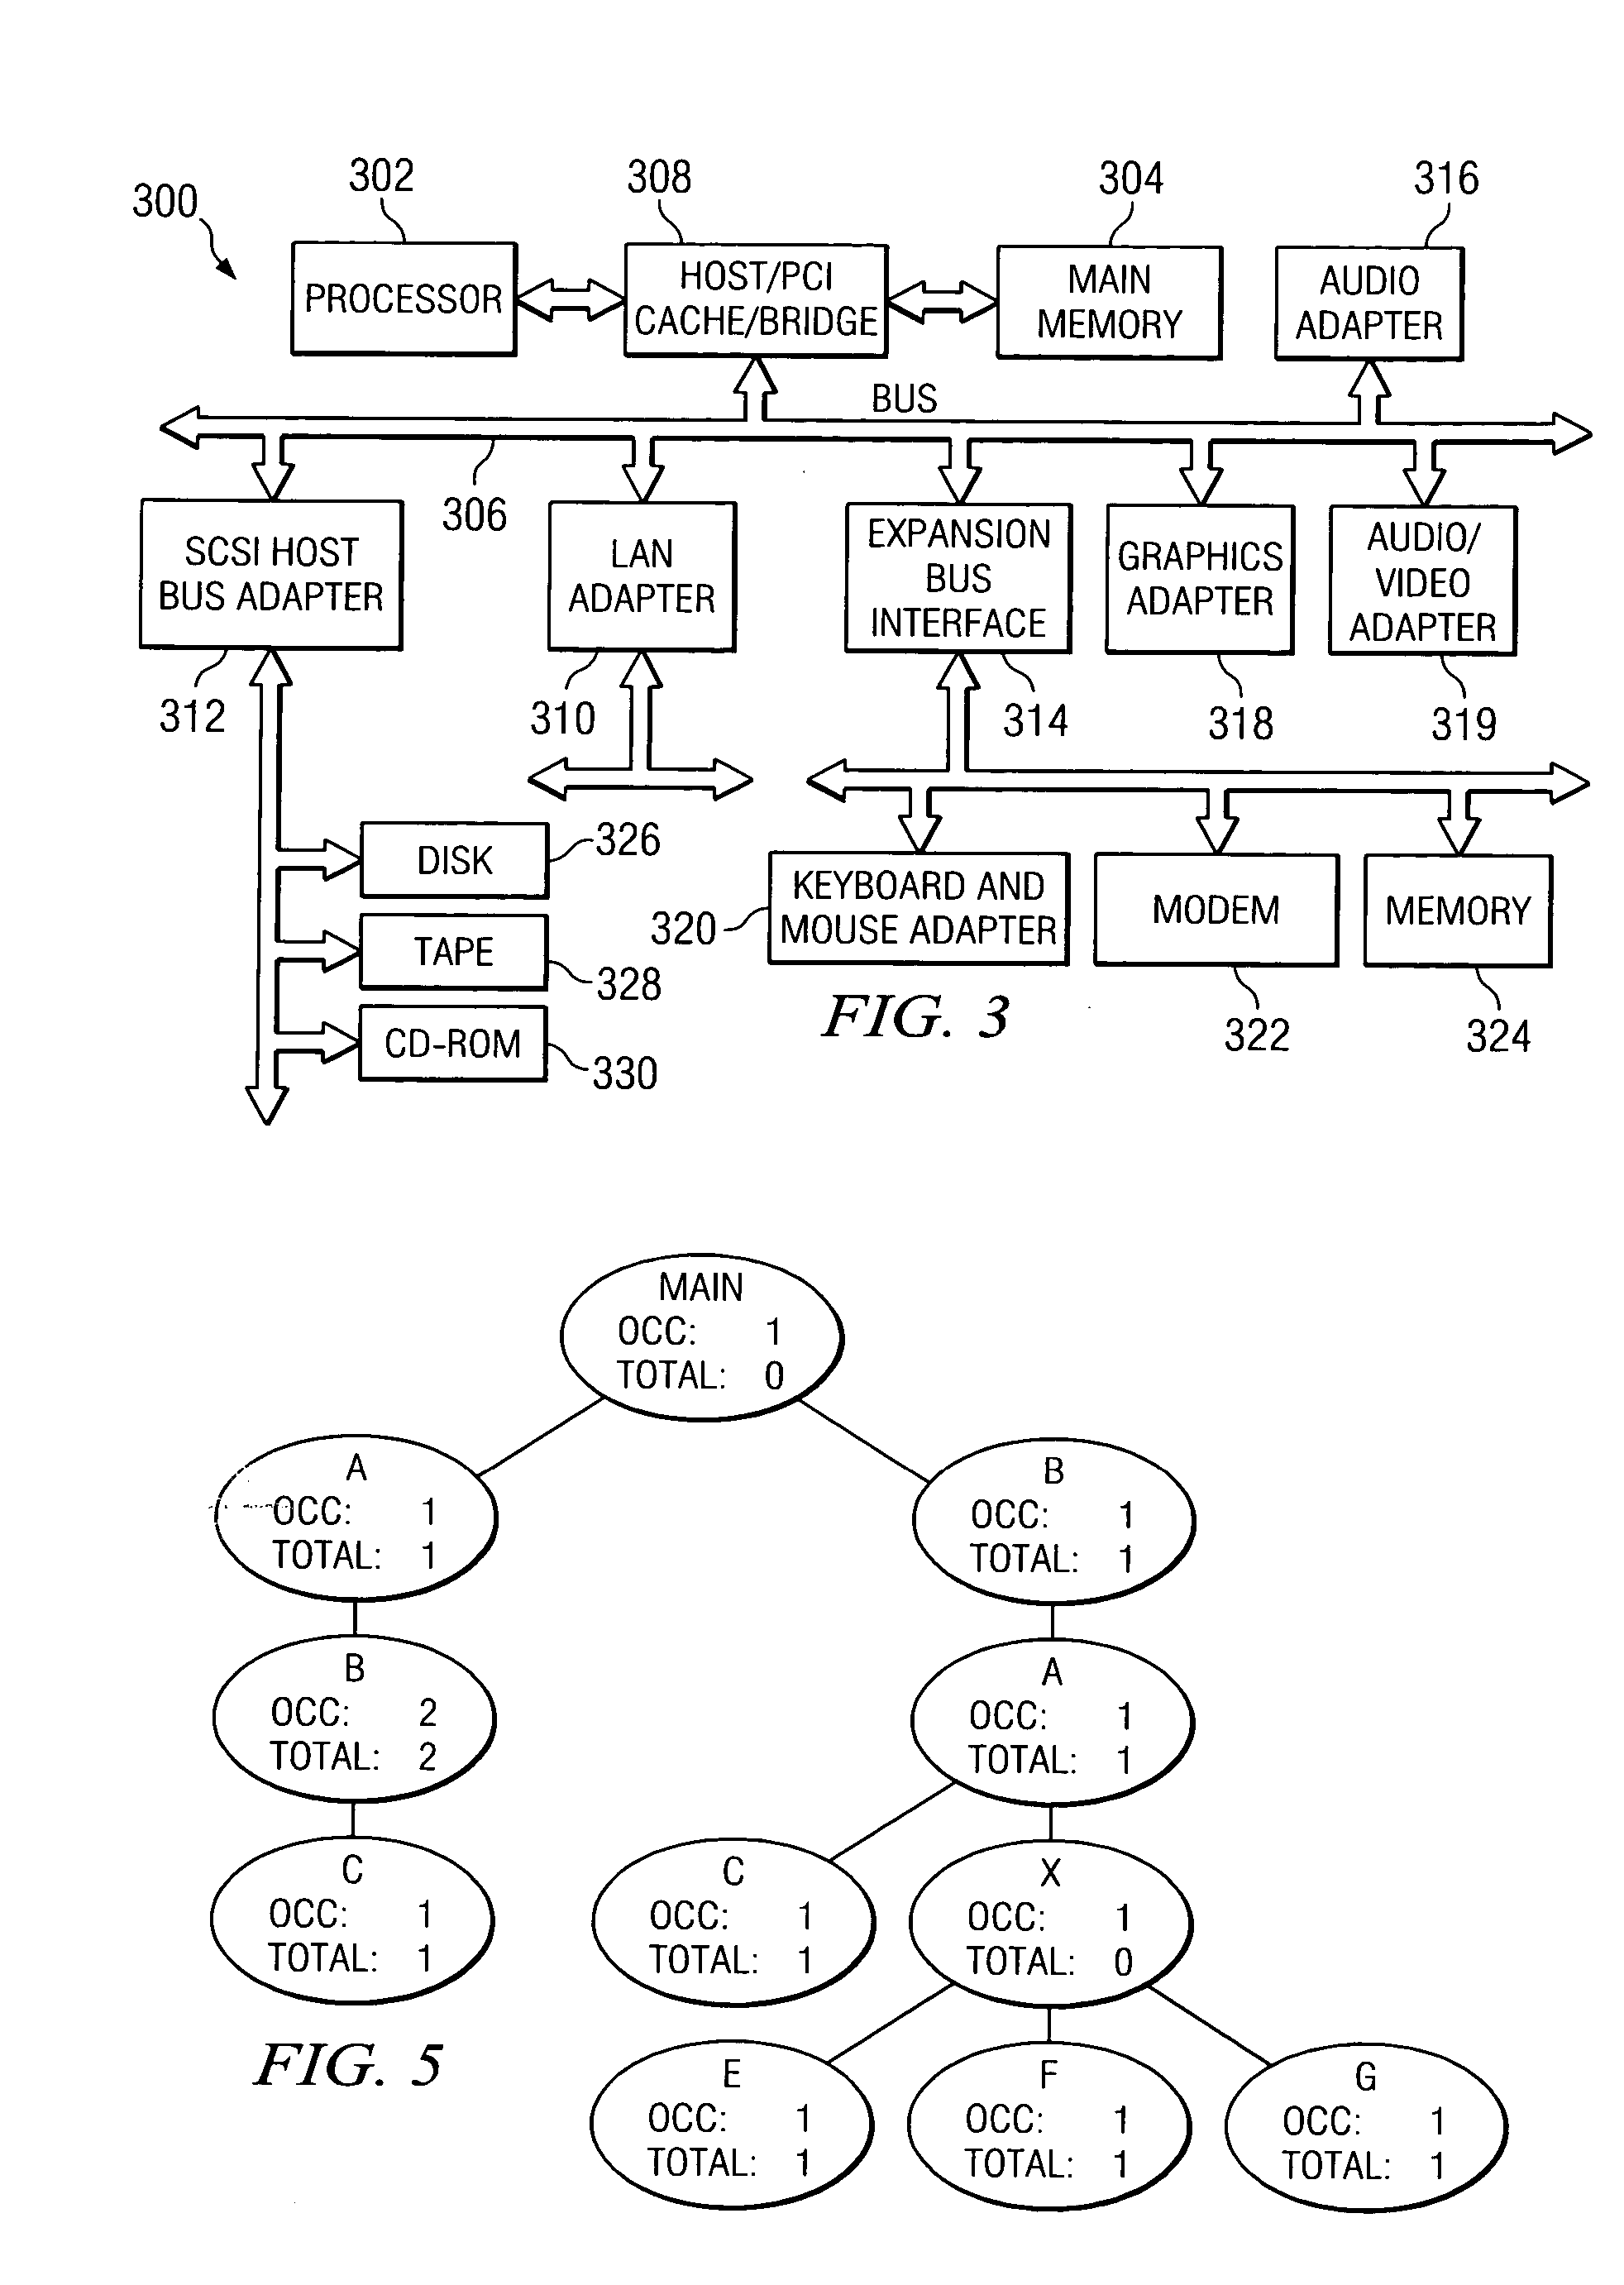 Method and apparatus for automatic detection of build regressions